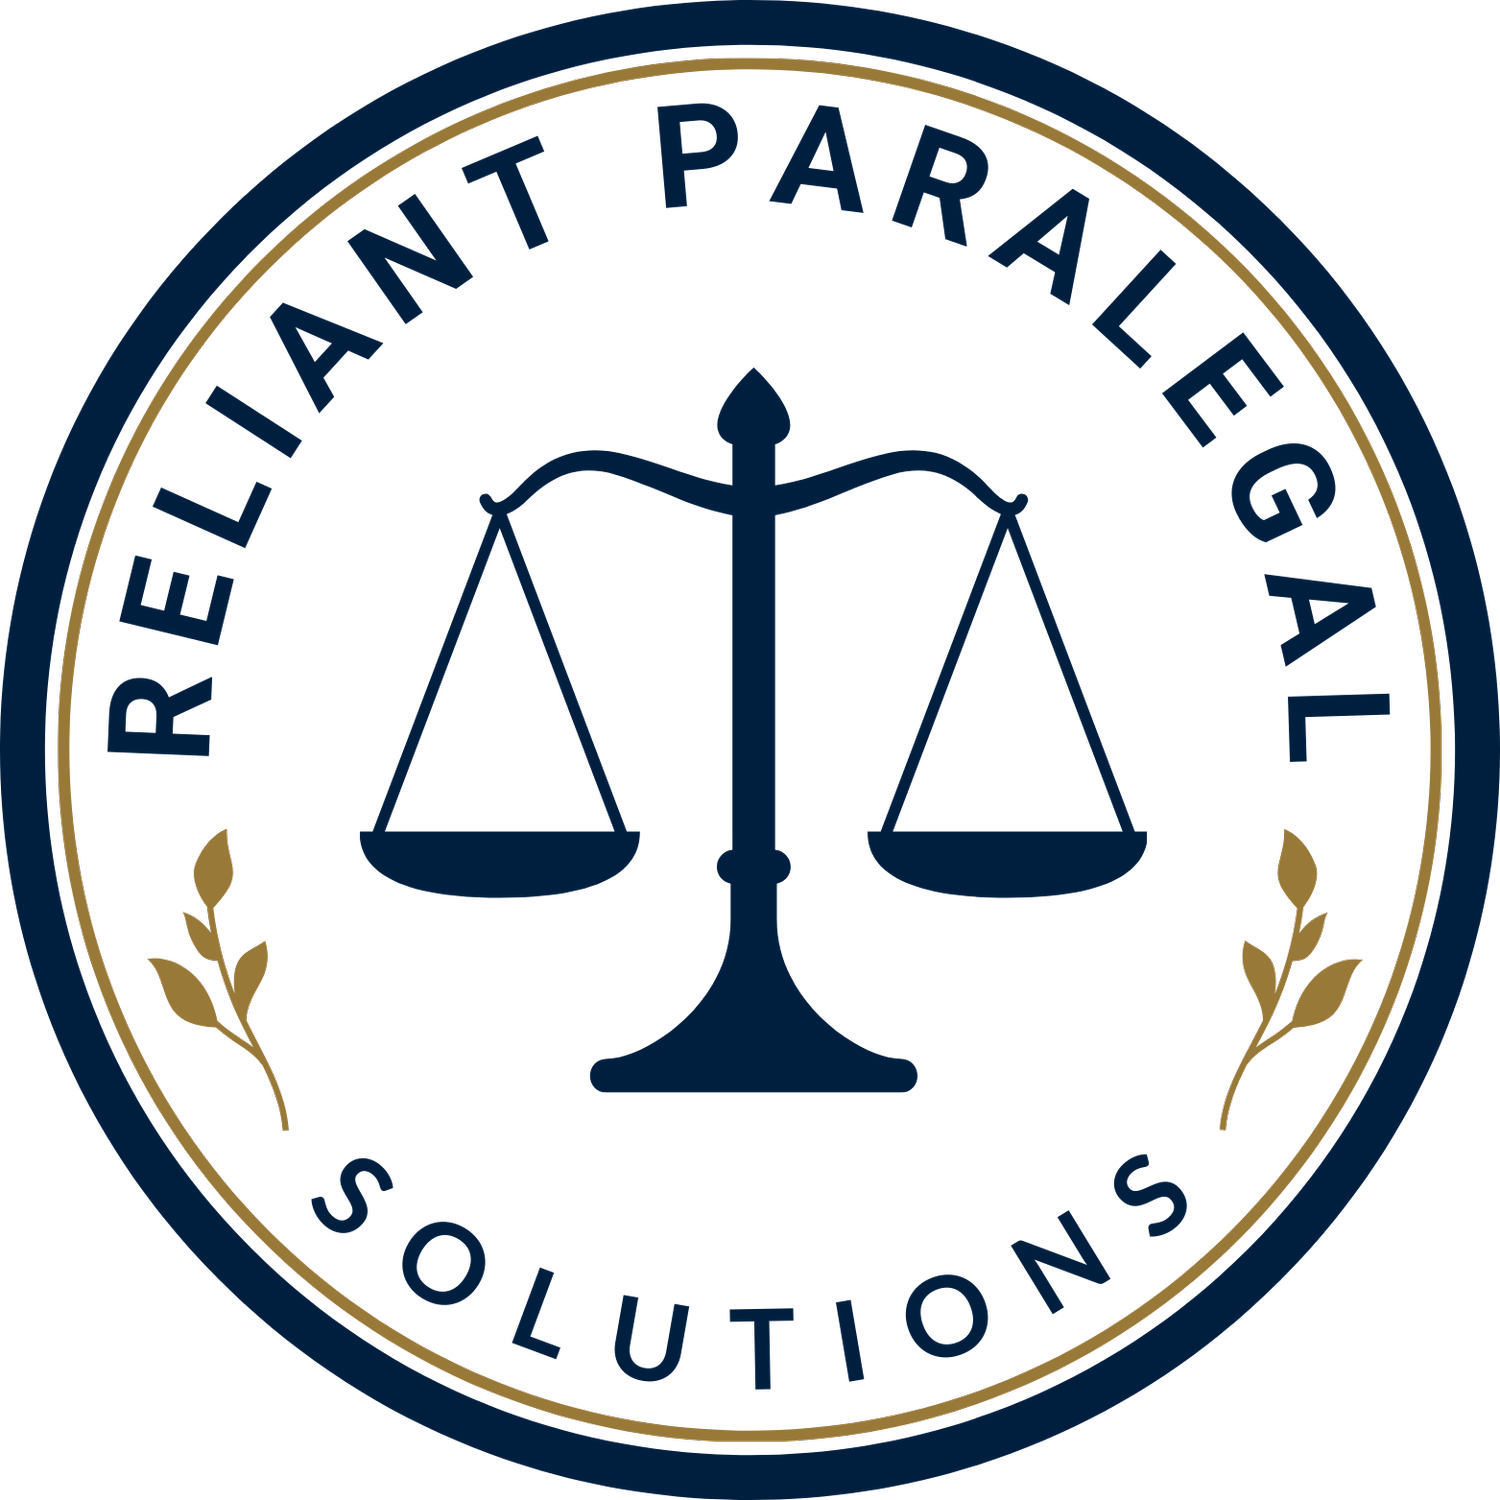 Reliant Paralegal Solutions